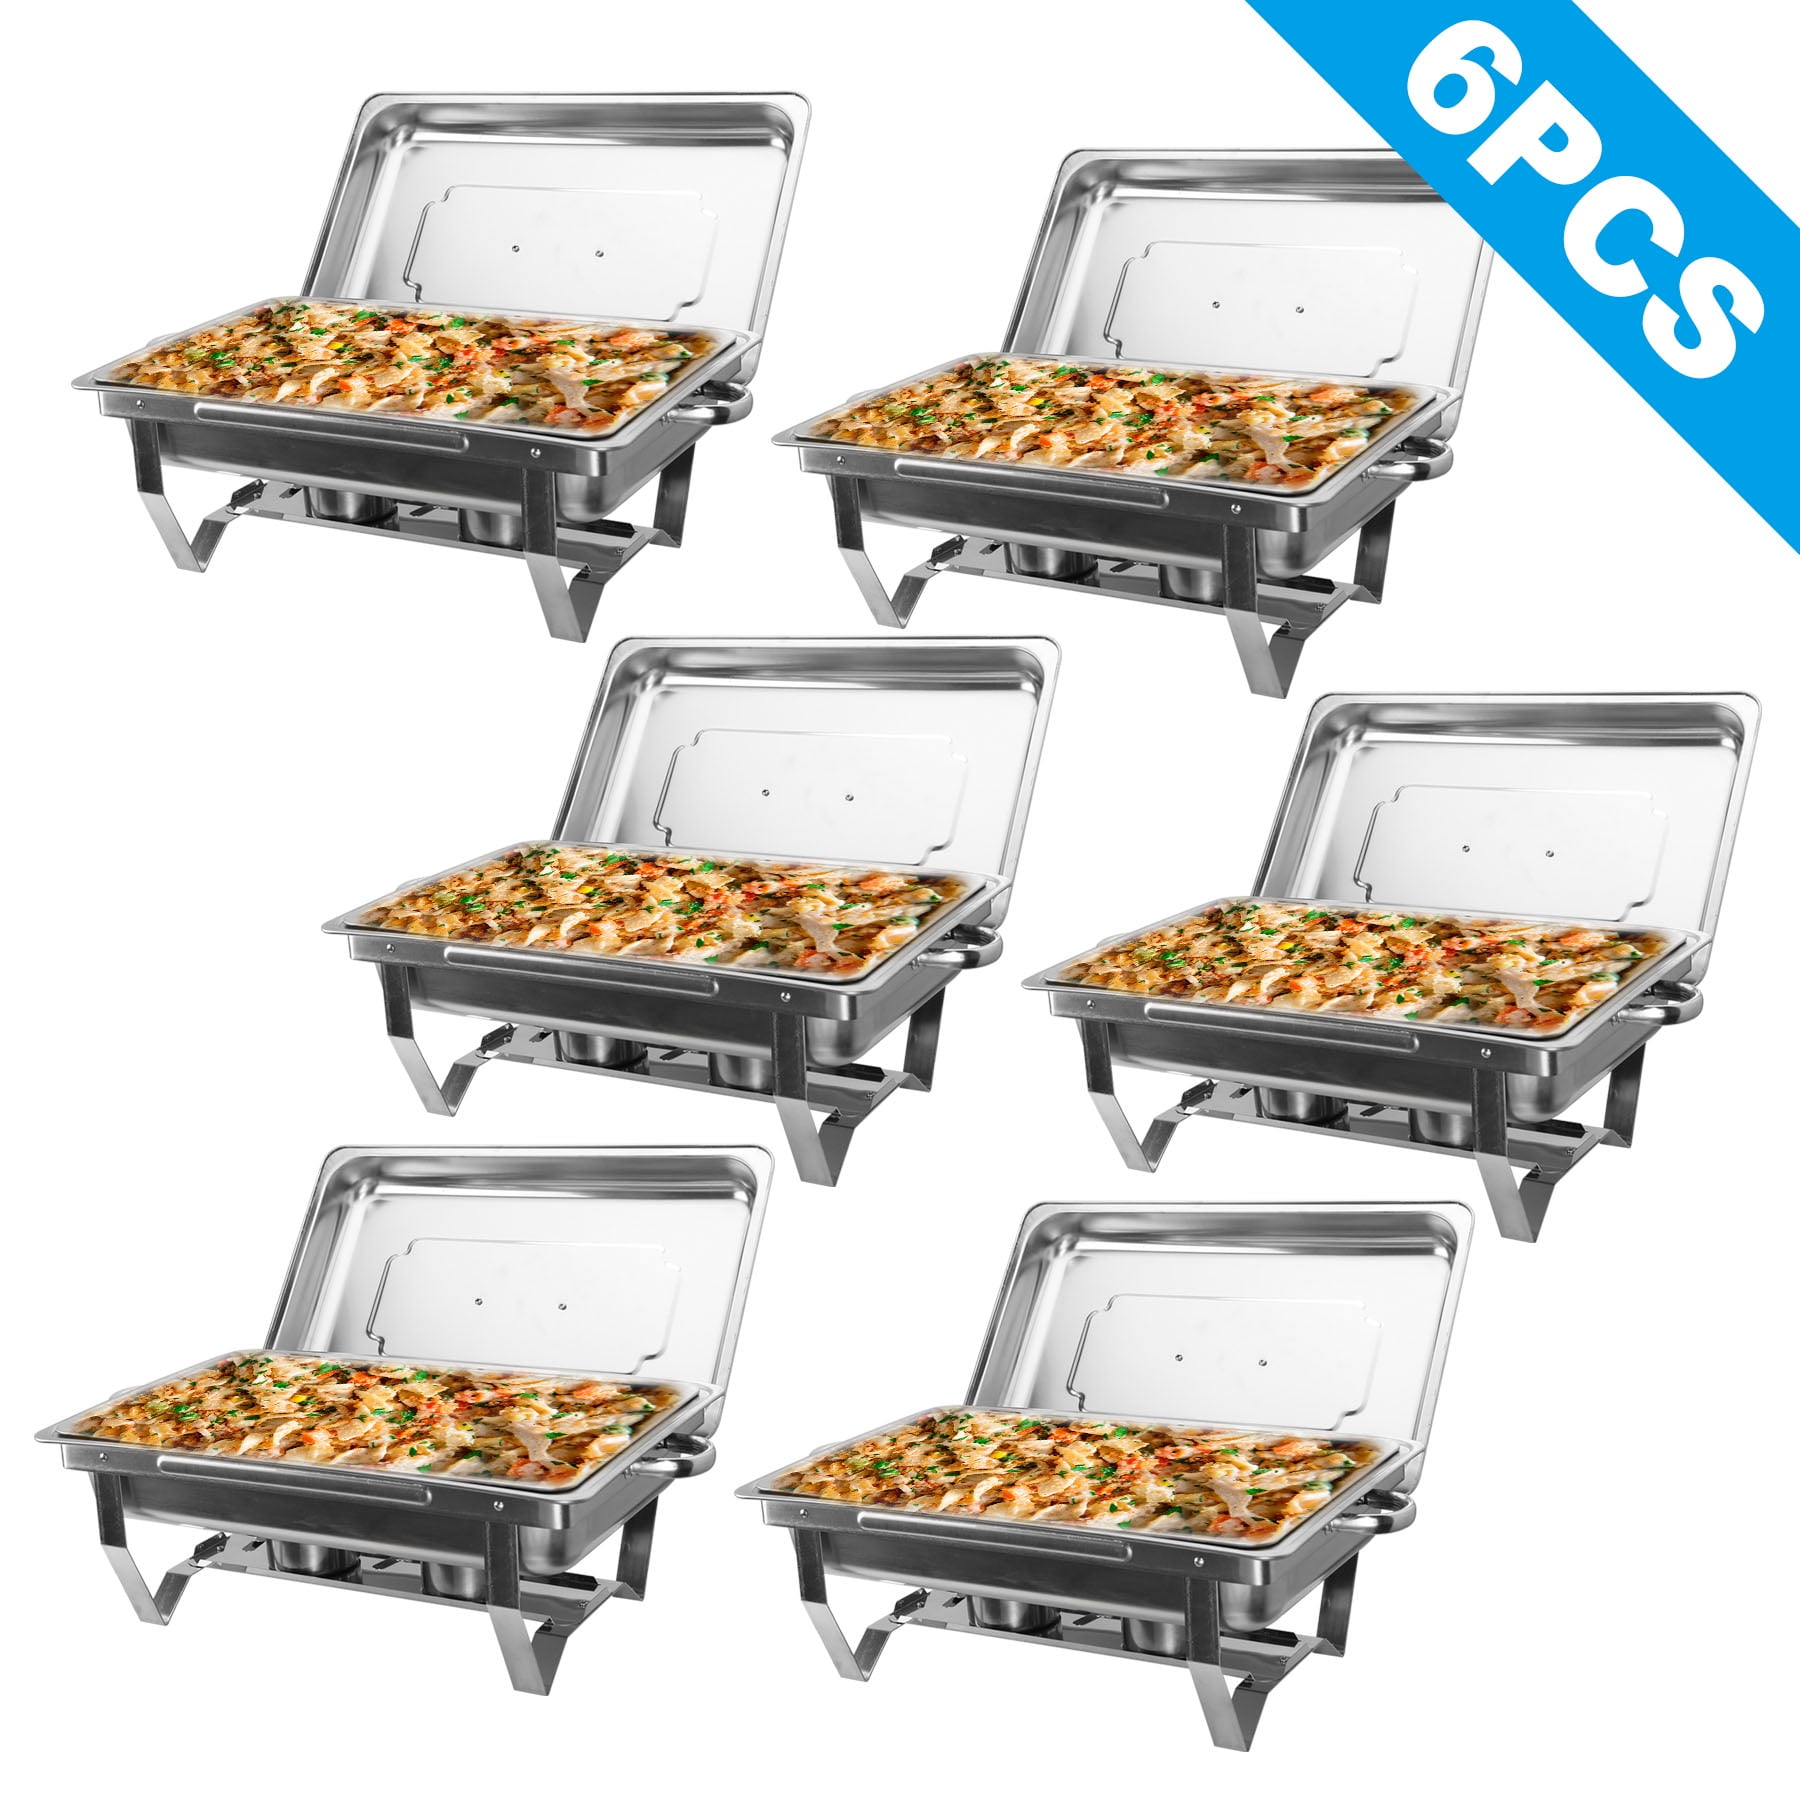 2 PACK FULL SIZE BUFFET CATERING STAINLESS STEEL CHAFER CHAFING DISH SETS 8 QT 